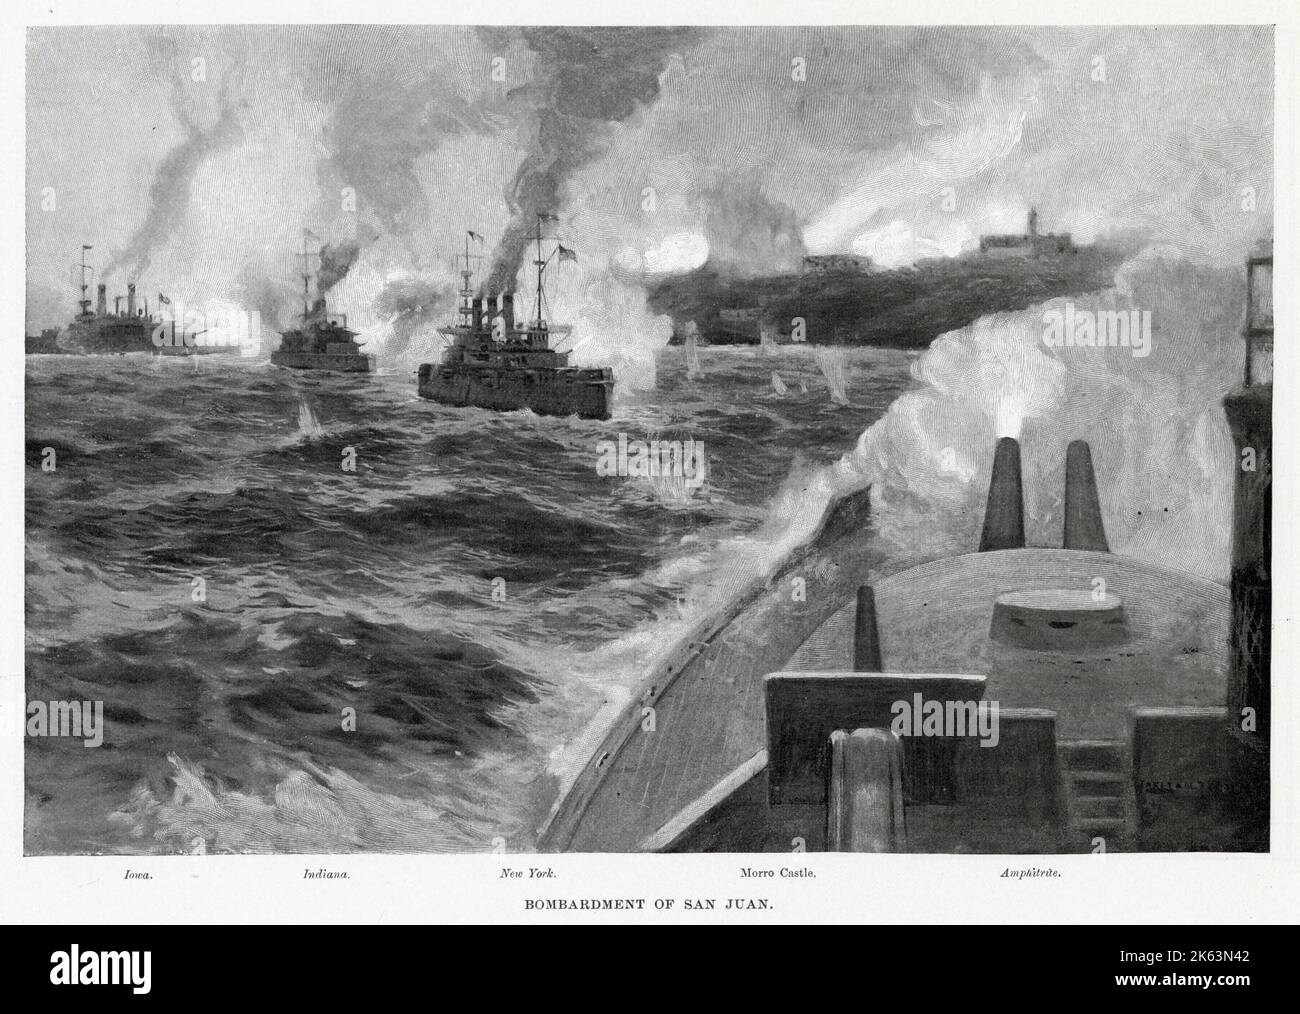 United States warships bombard San Juan, which will later be taken by the ground forces, including Theodore Roosevelt      Date: June 1898 Stock Photo